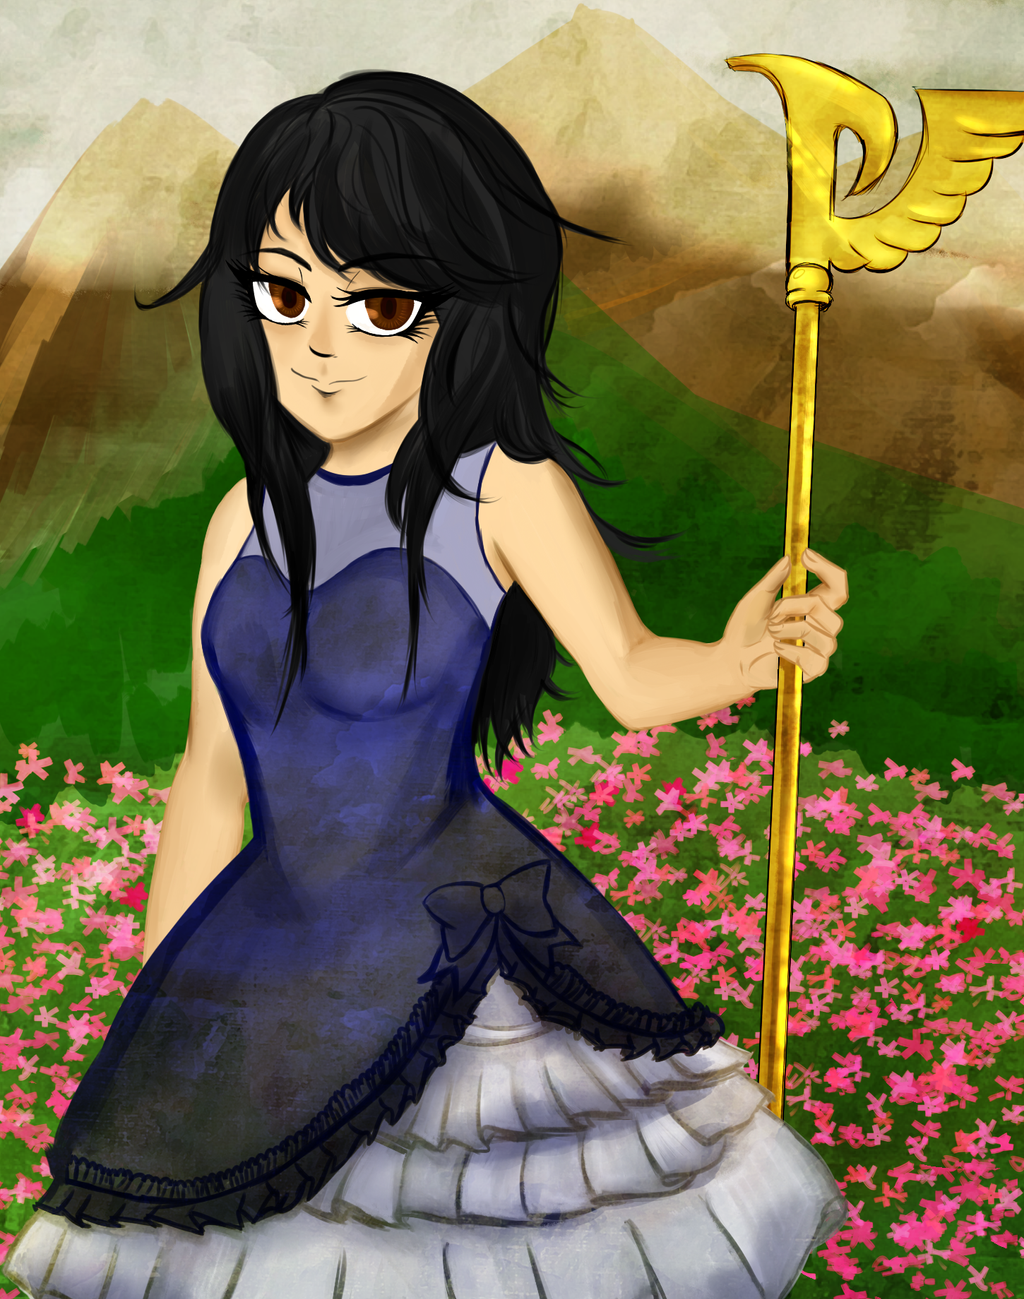 belle_of_the_valley_by_loopypanda-dcm1z7s.png